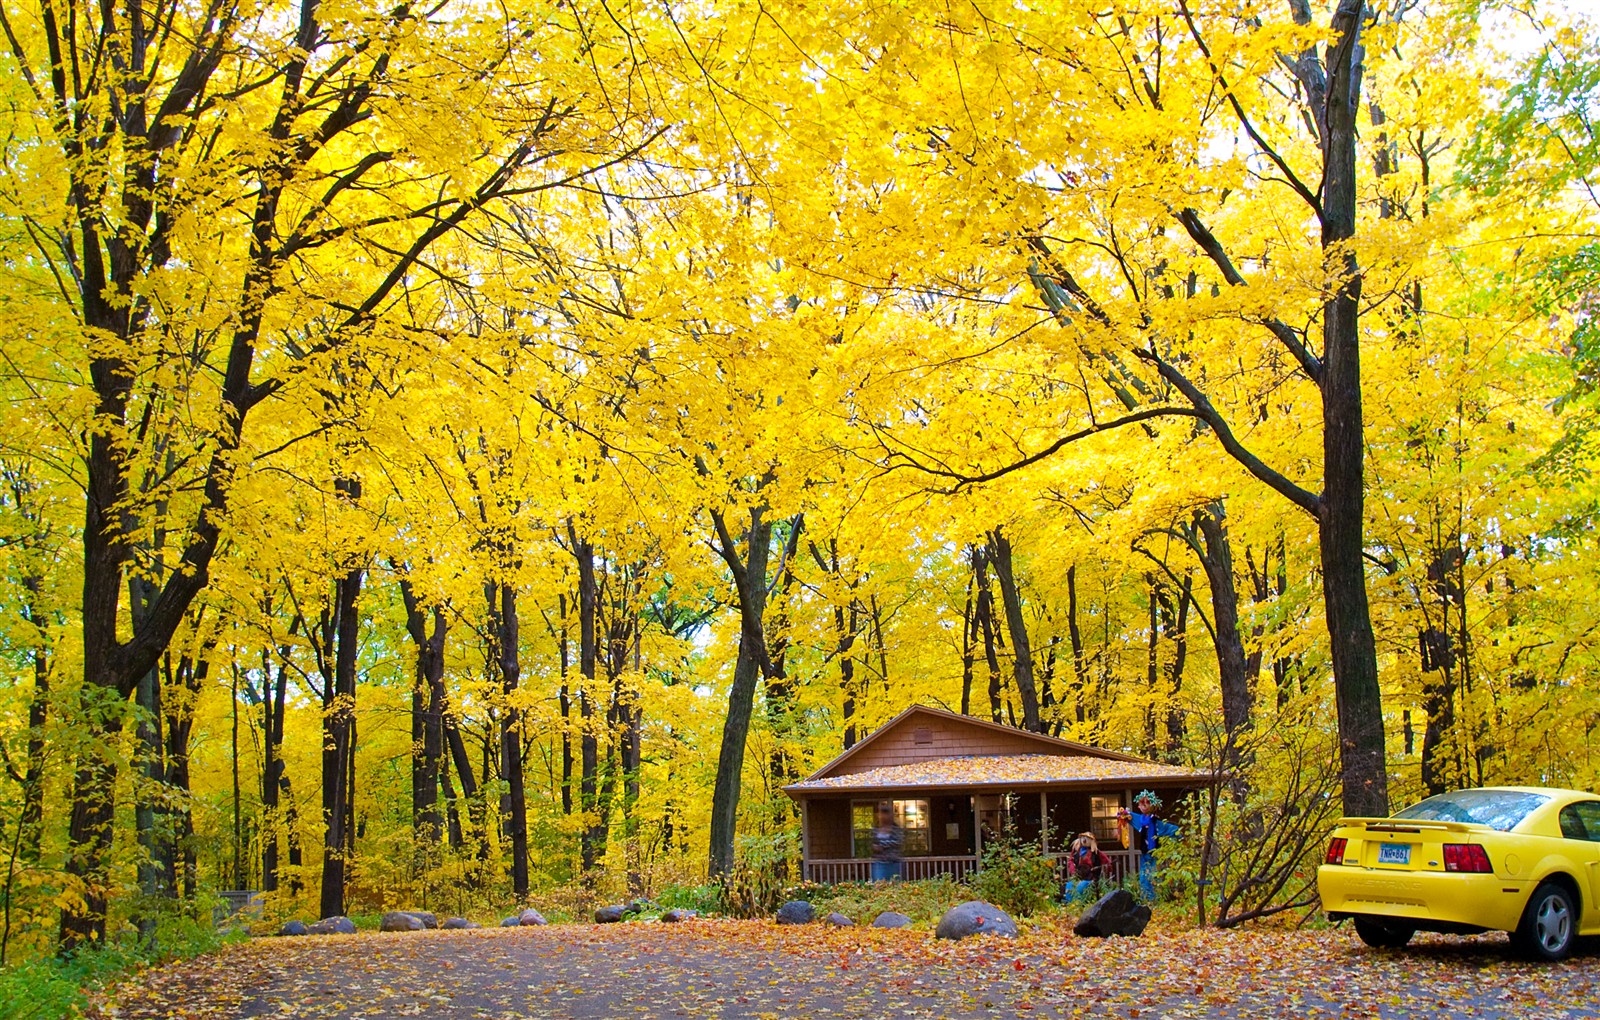 hd yellow forest image